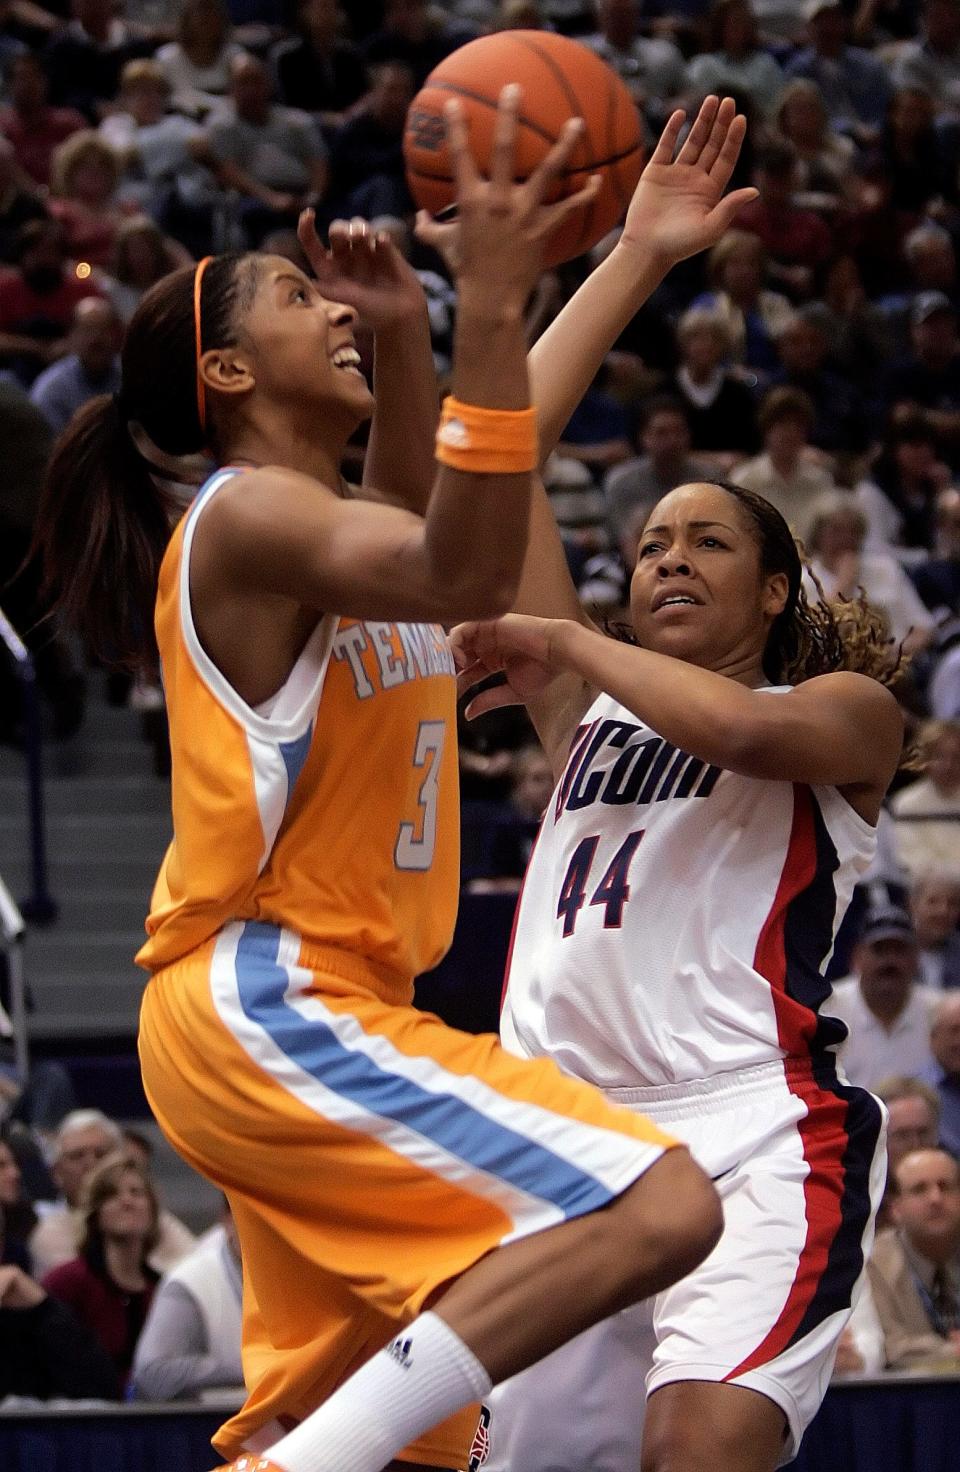 Tennessee's Candace Parker drives to the rim vs. UConn on Jan. 6, 2007, the last time the Lady Vols beat the Huskies.